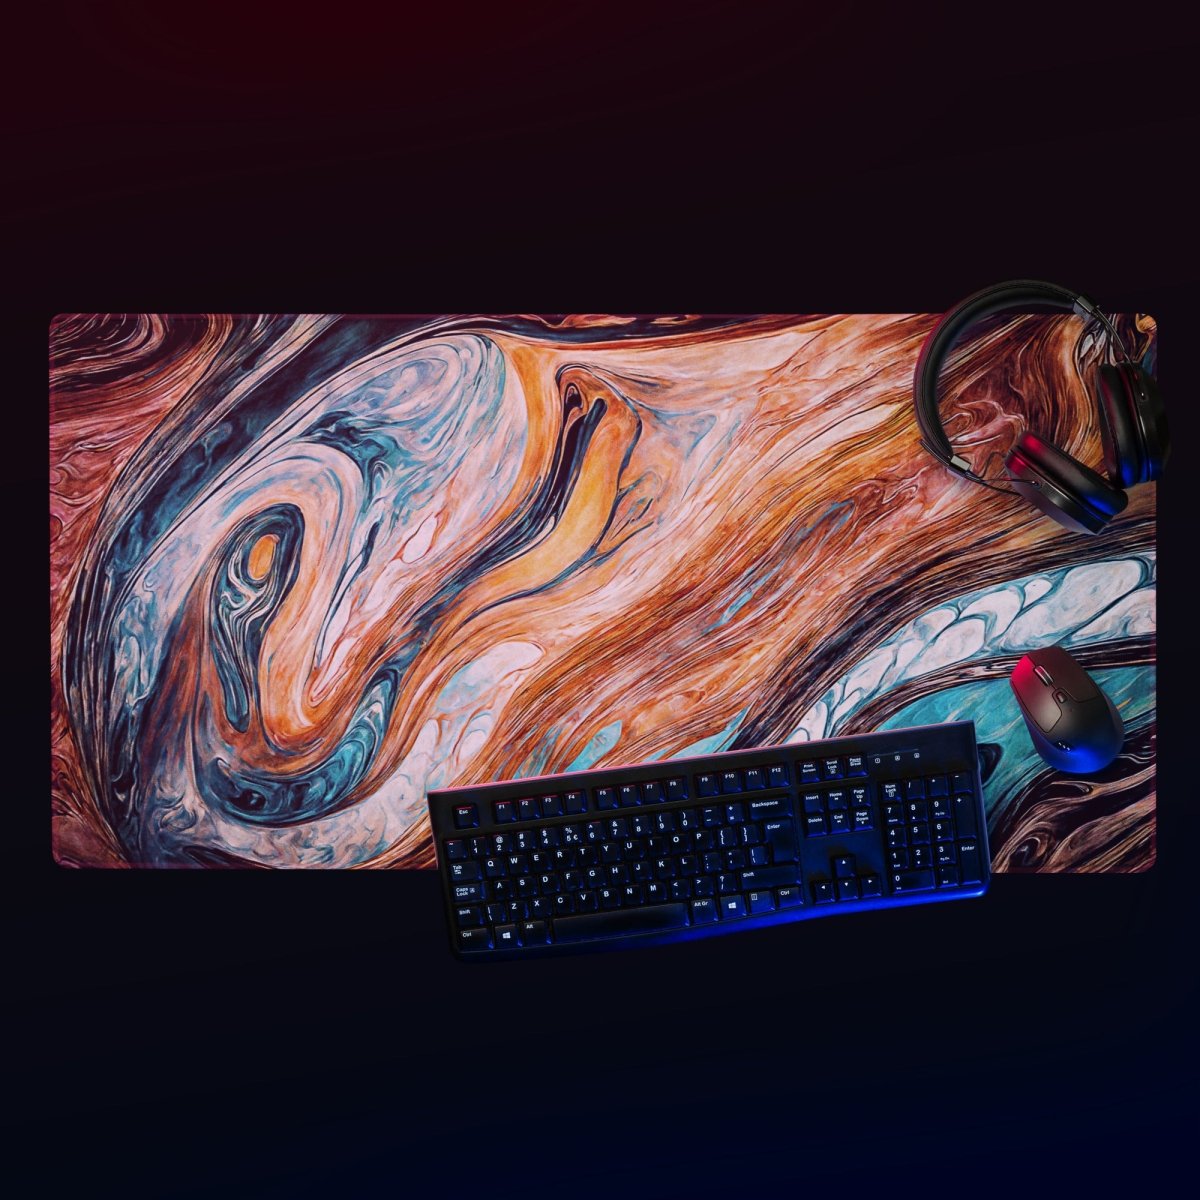 Cosmic whirl - Gaming mouse pad - Ever colorful